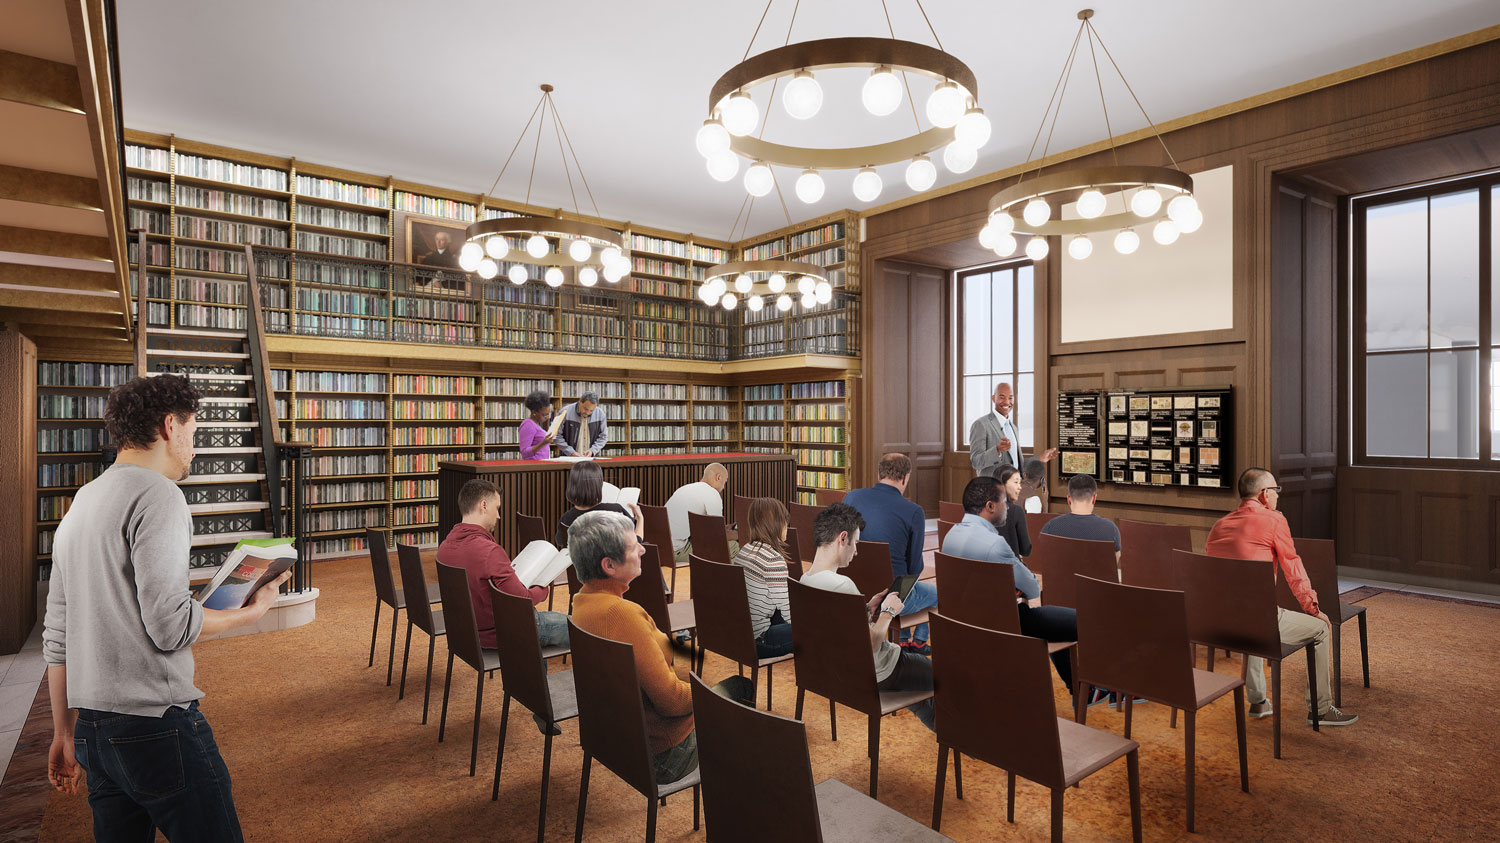 The Schwarzman Building's new Lenox and Astor Room will provide space for research and programs.